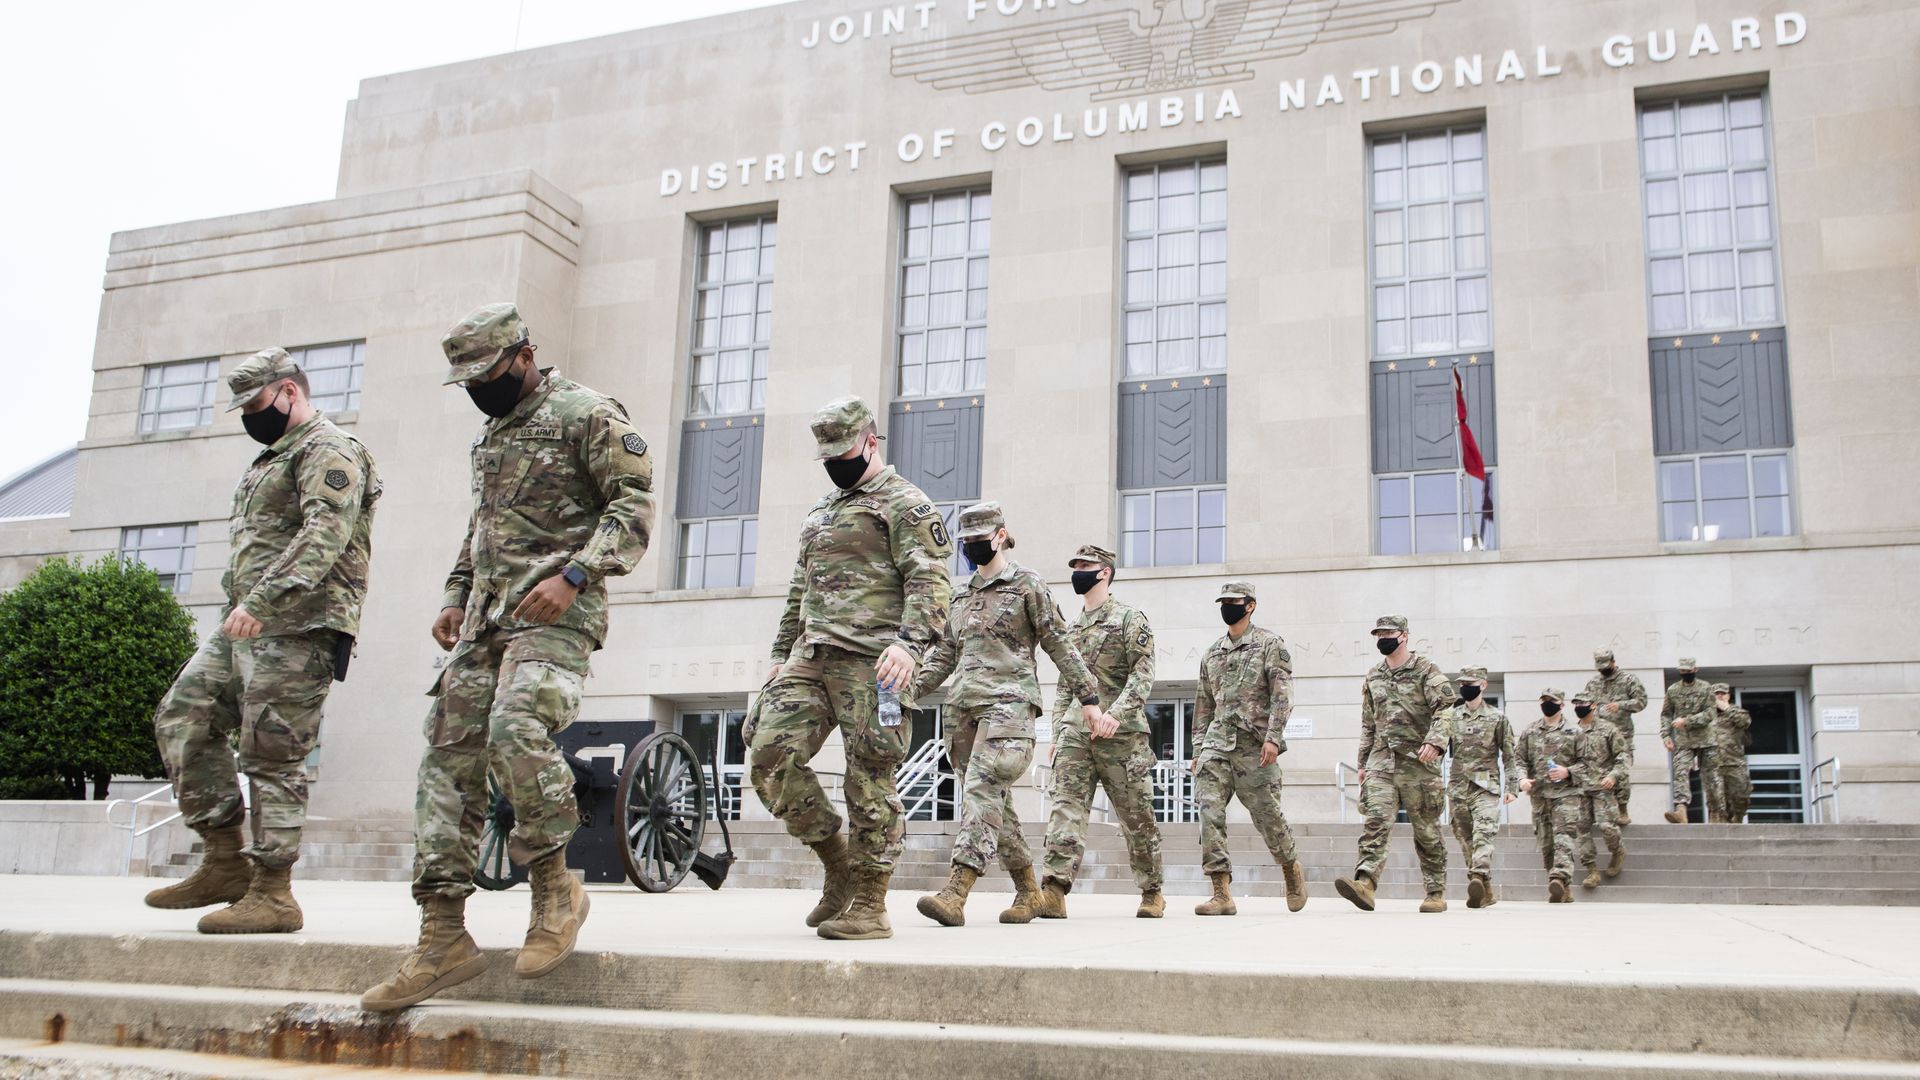 Photo of National Guard soldiers in uniform walking out of the D.C. National Guard building in formation